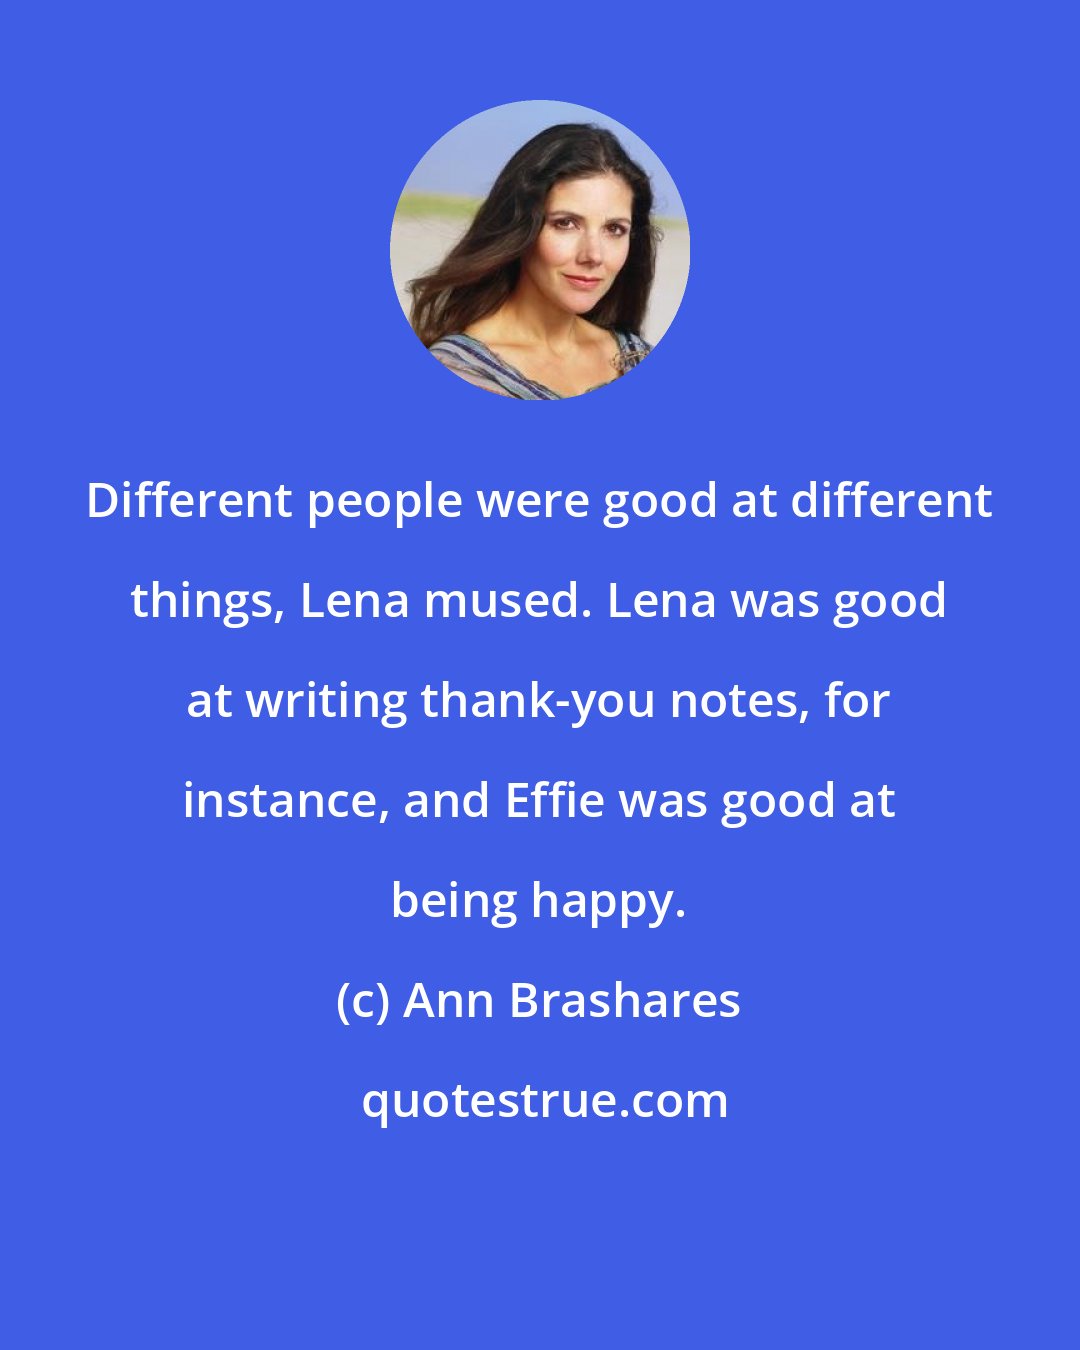 Ann Brashares: Different people were good at different things, Lena mused. Lena was good at writing thank-you notes, for instance, and Effie was good at being happy.